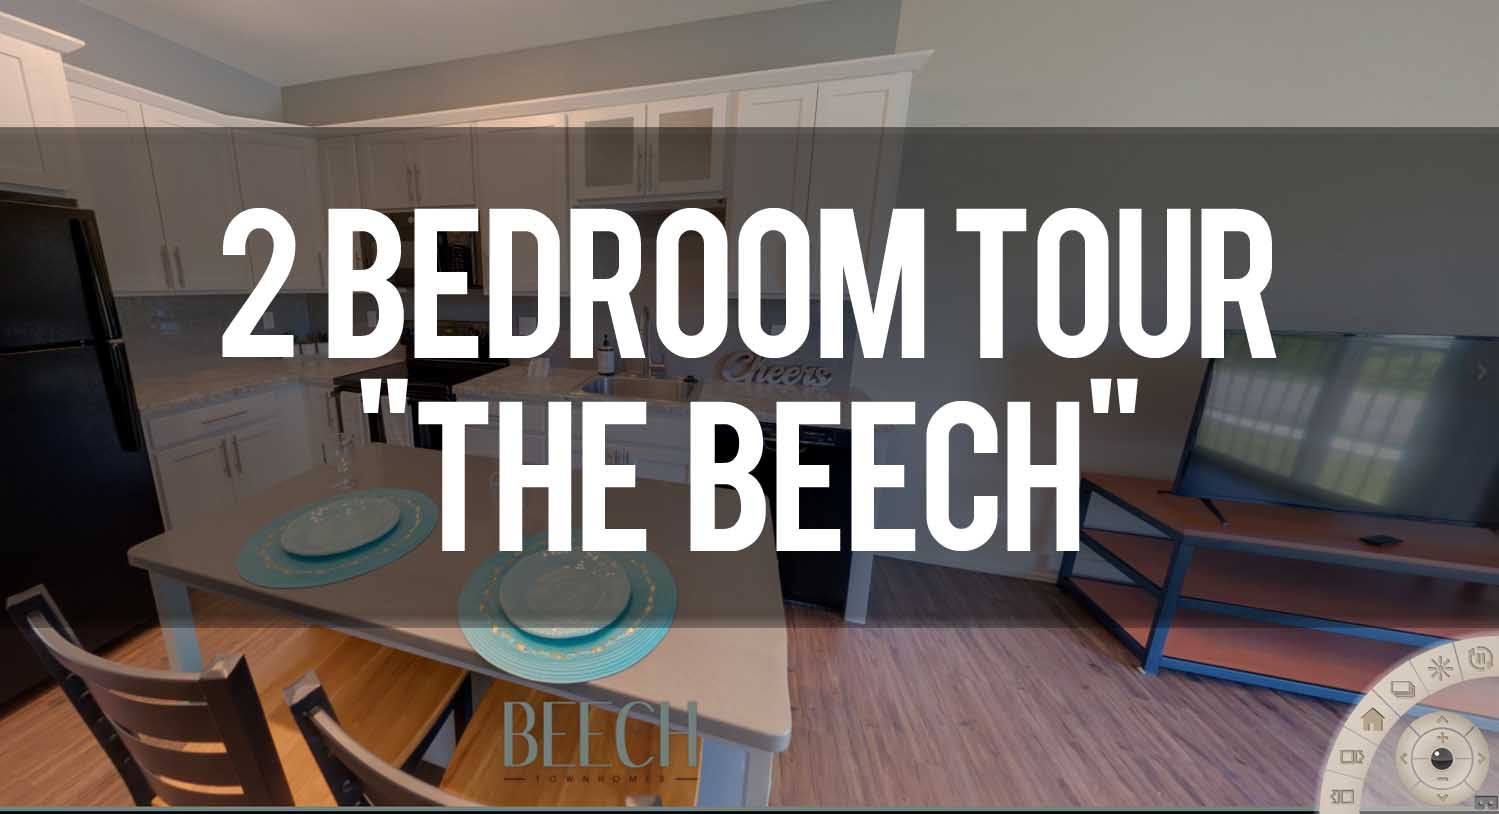 Virtual Tour of 2 Bedroom at Beech Townhomes